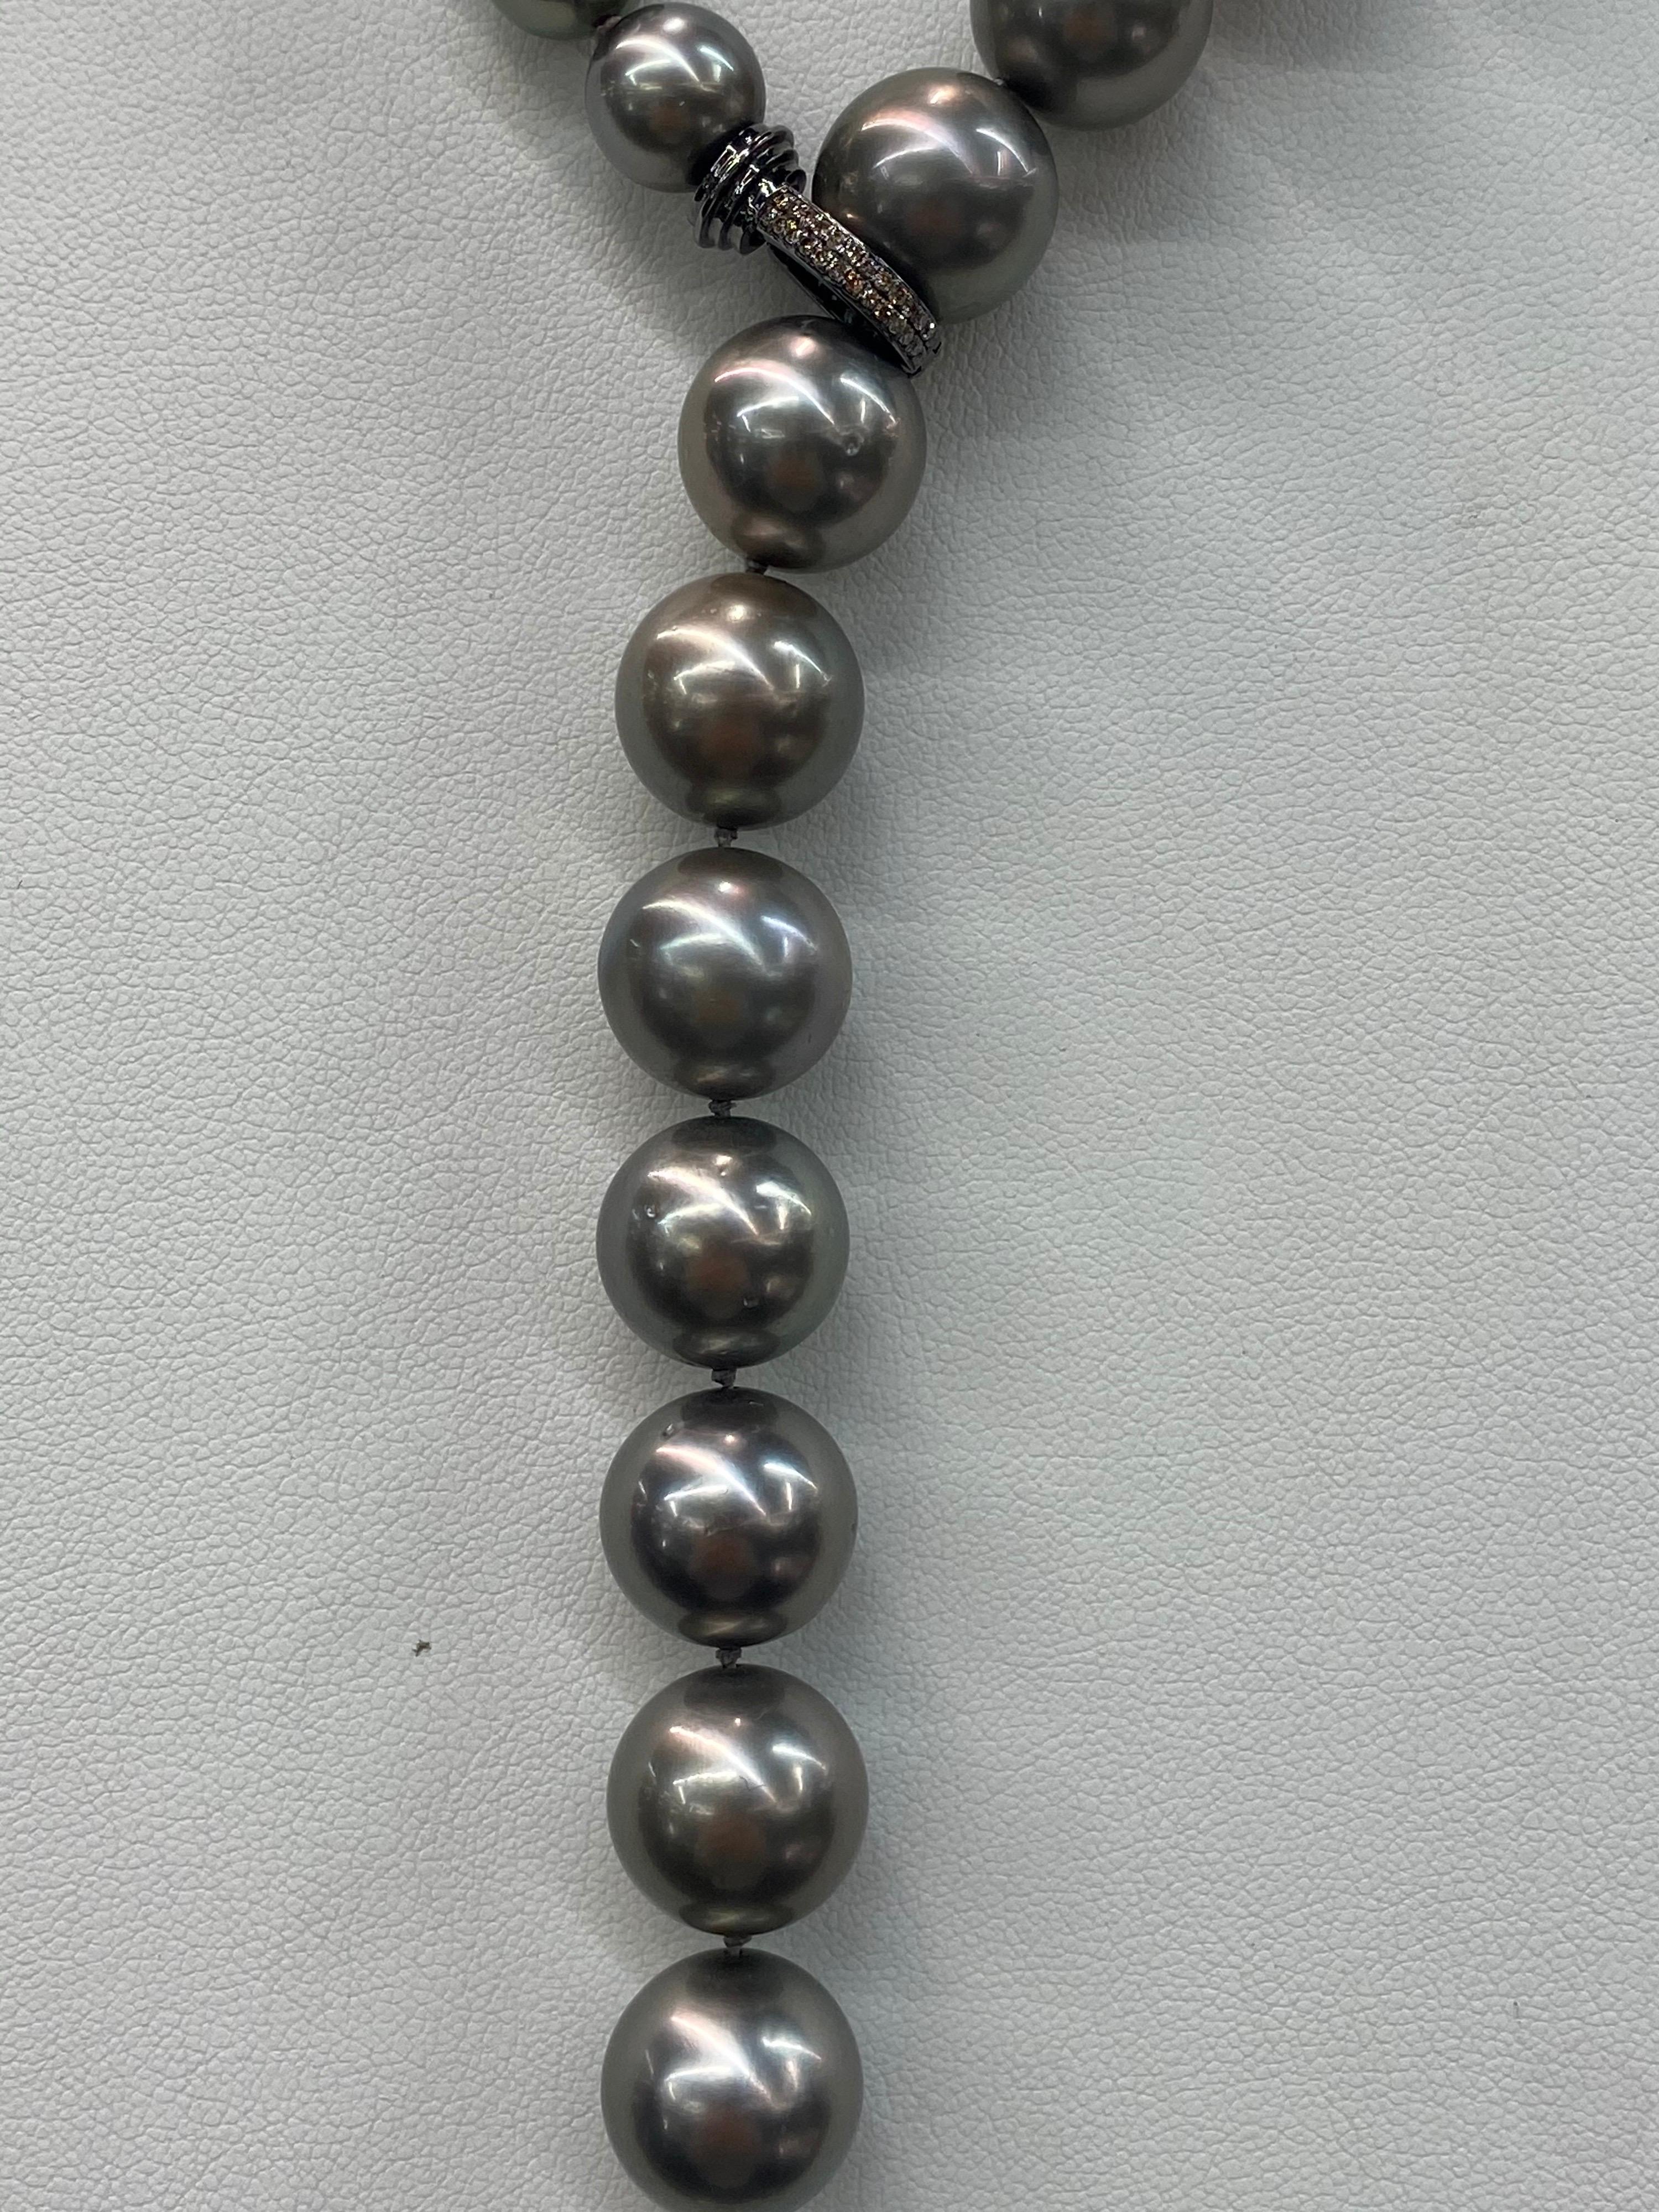 pearl necklace with clasp in front